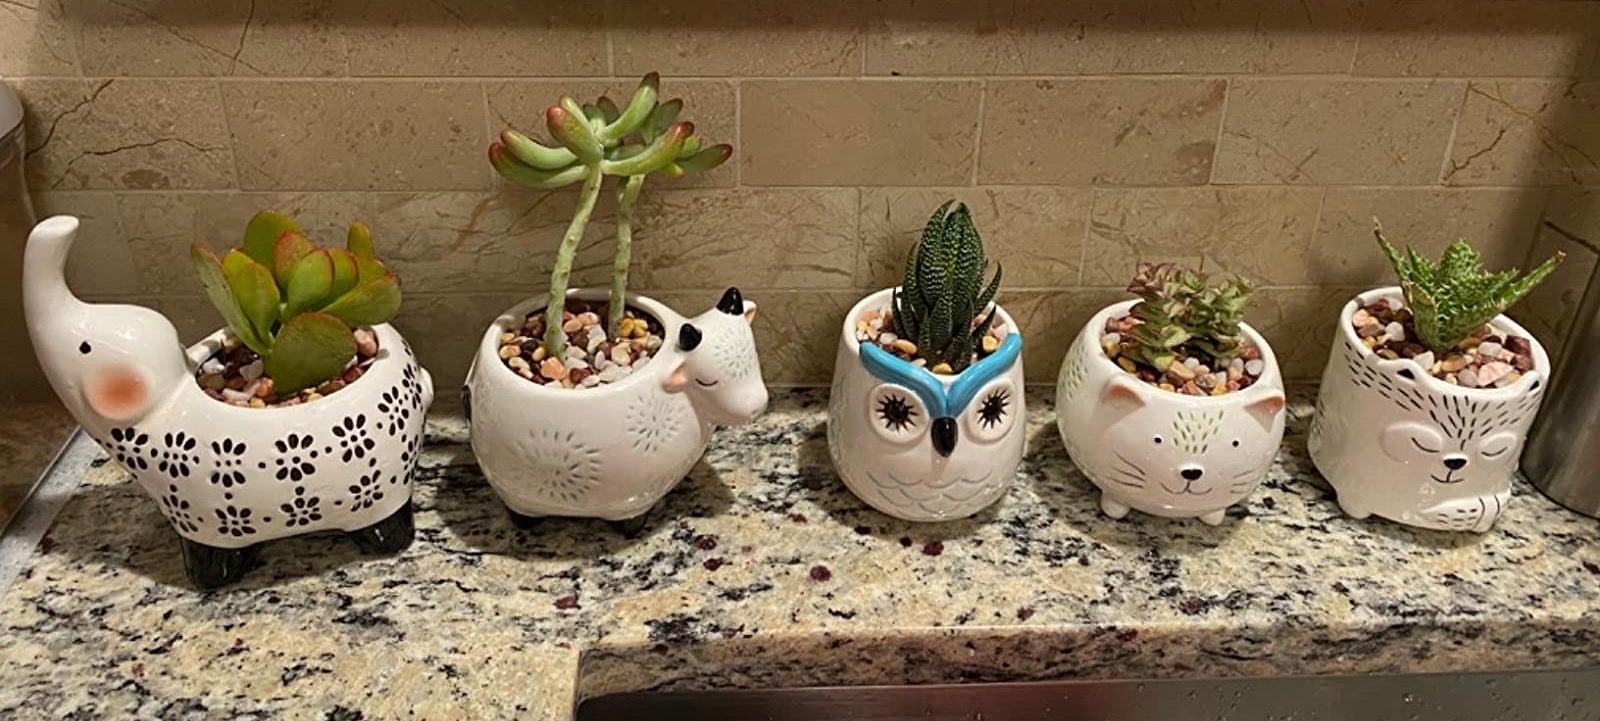 Reviewer image of five animal-shaped succulent pots (an elephant, sheep, owl, cat, and fox) with plants inside